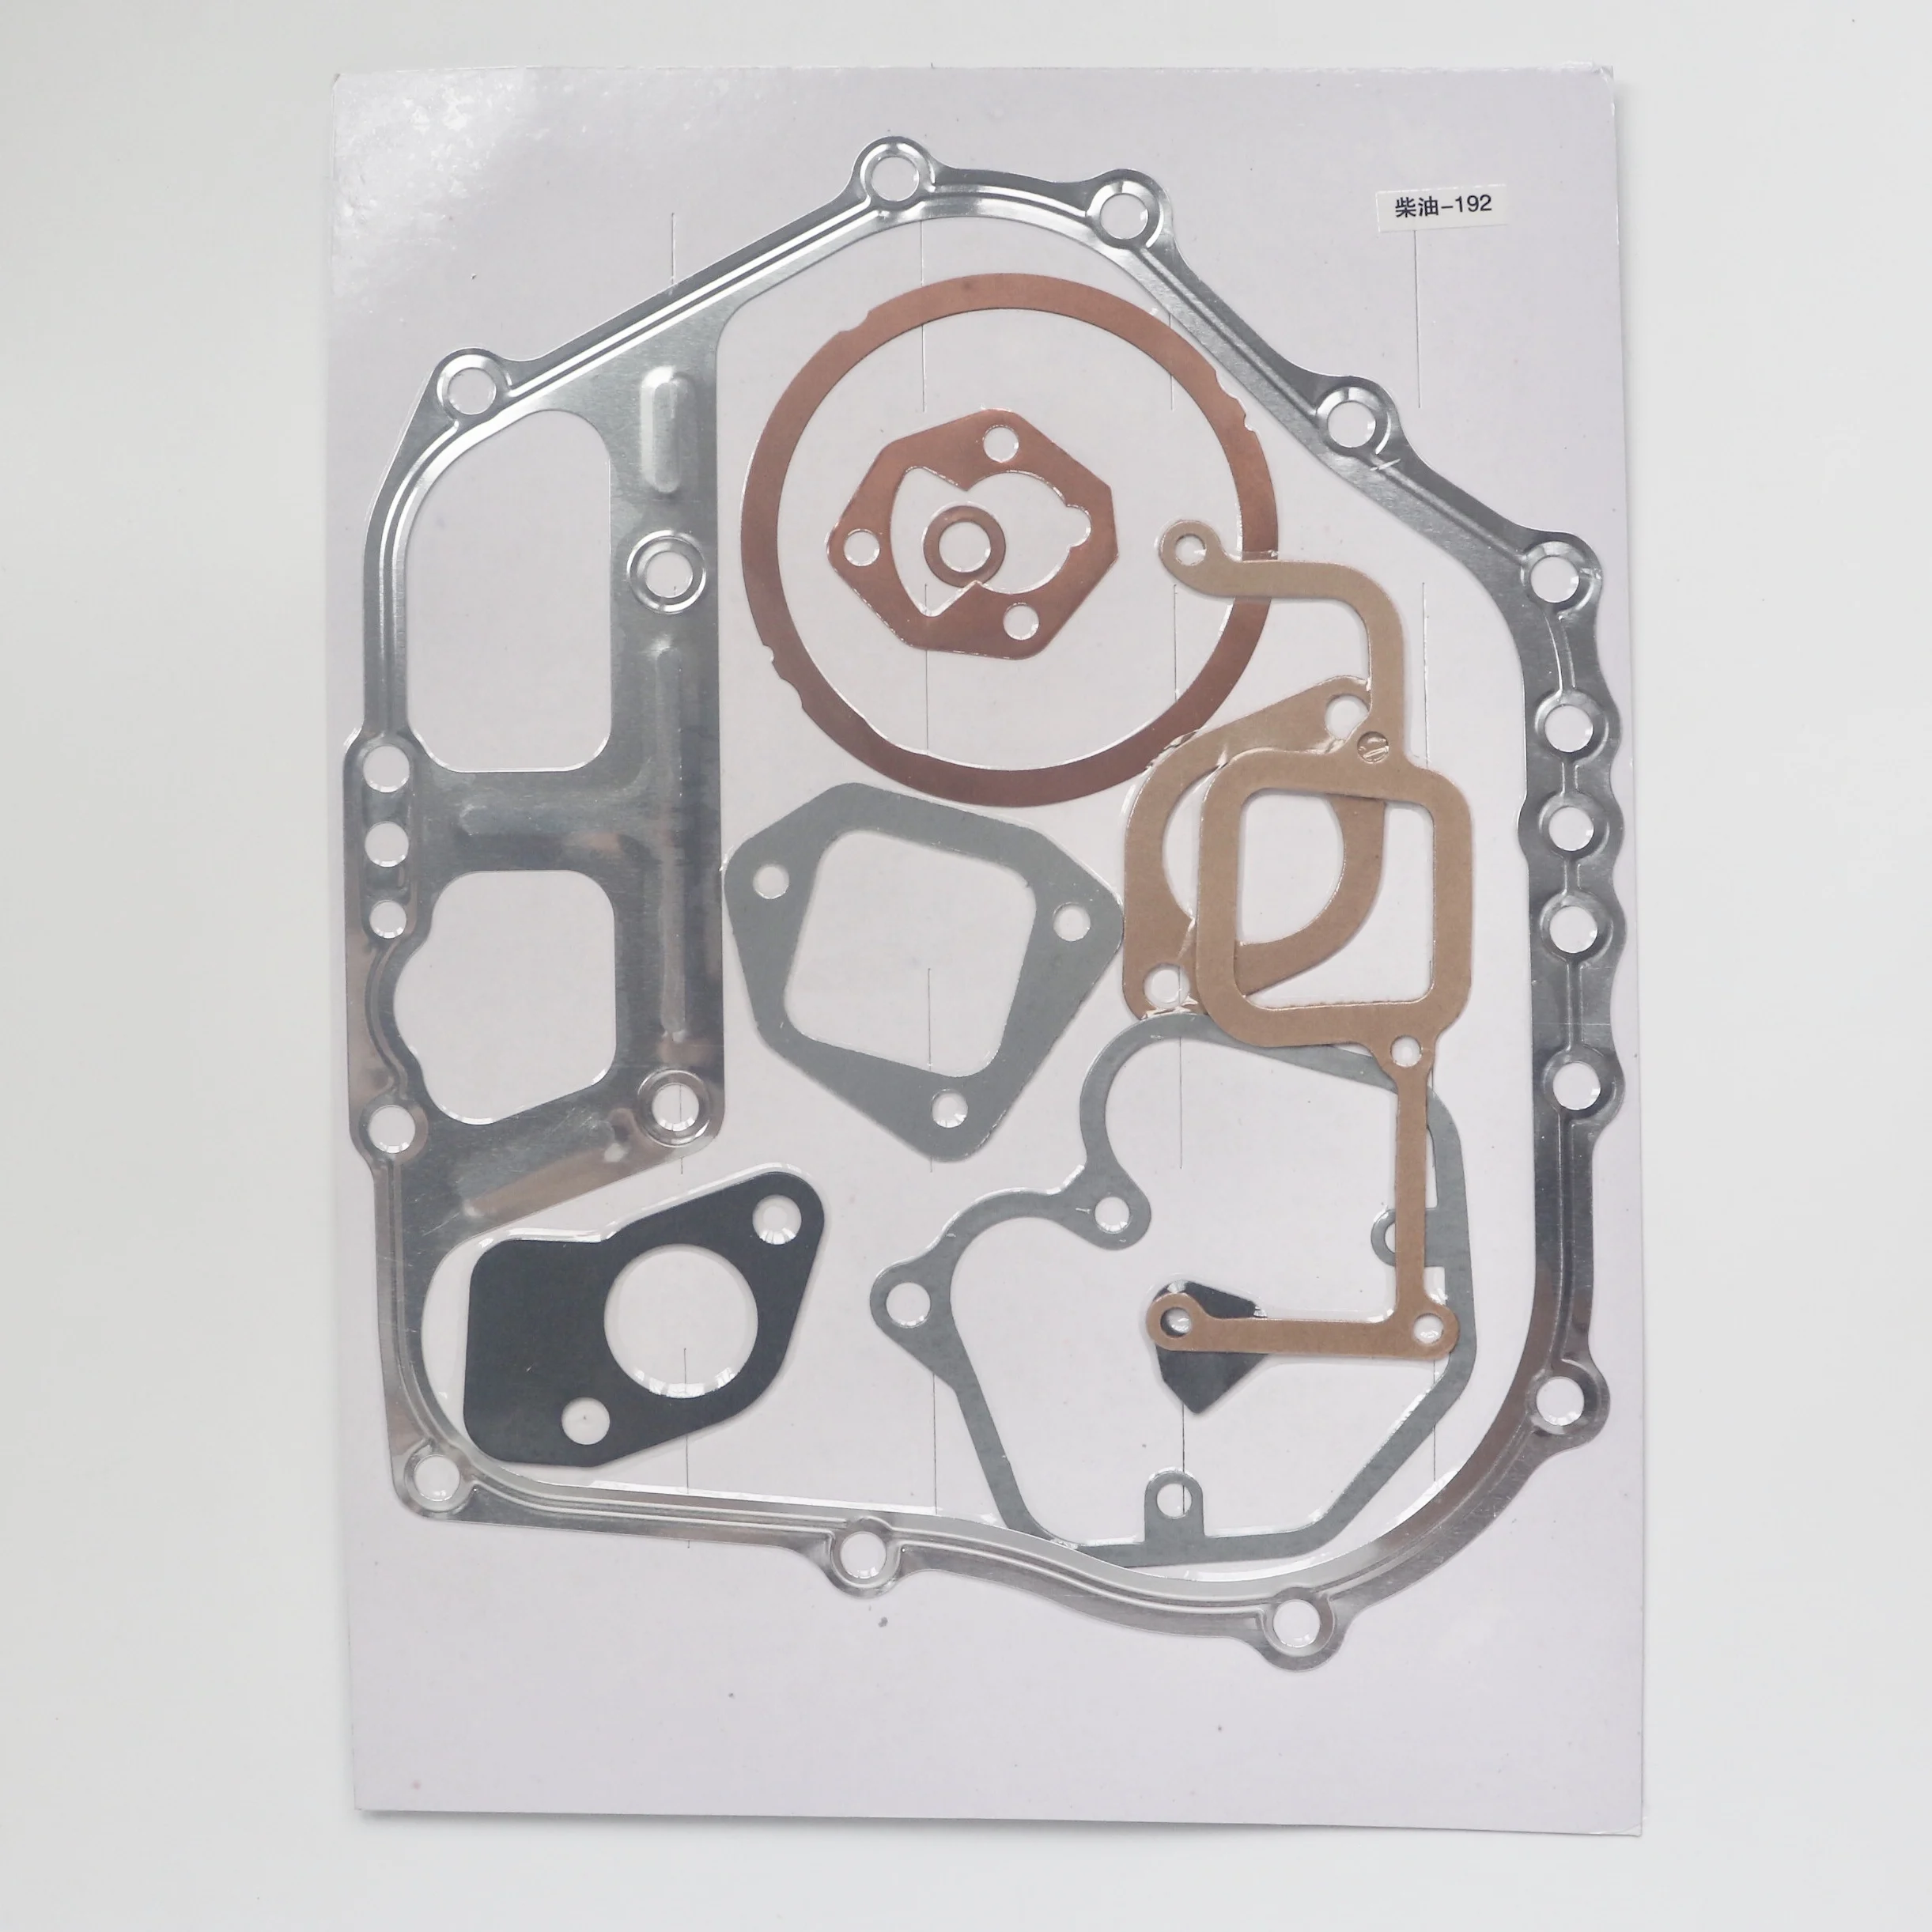 FULL GASKET SET FOR CHINESE 192 AIR-COOLED DIESEL GENERATOR BASE GASKET REPLACEMENT PARTS